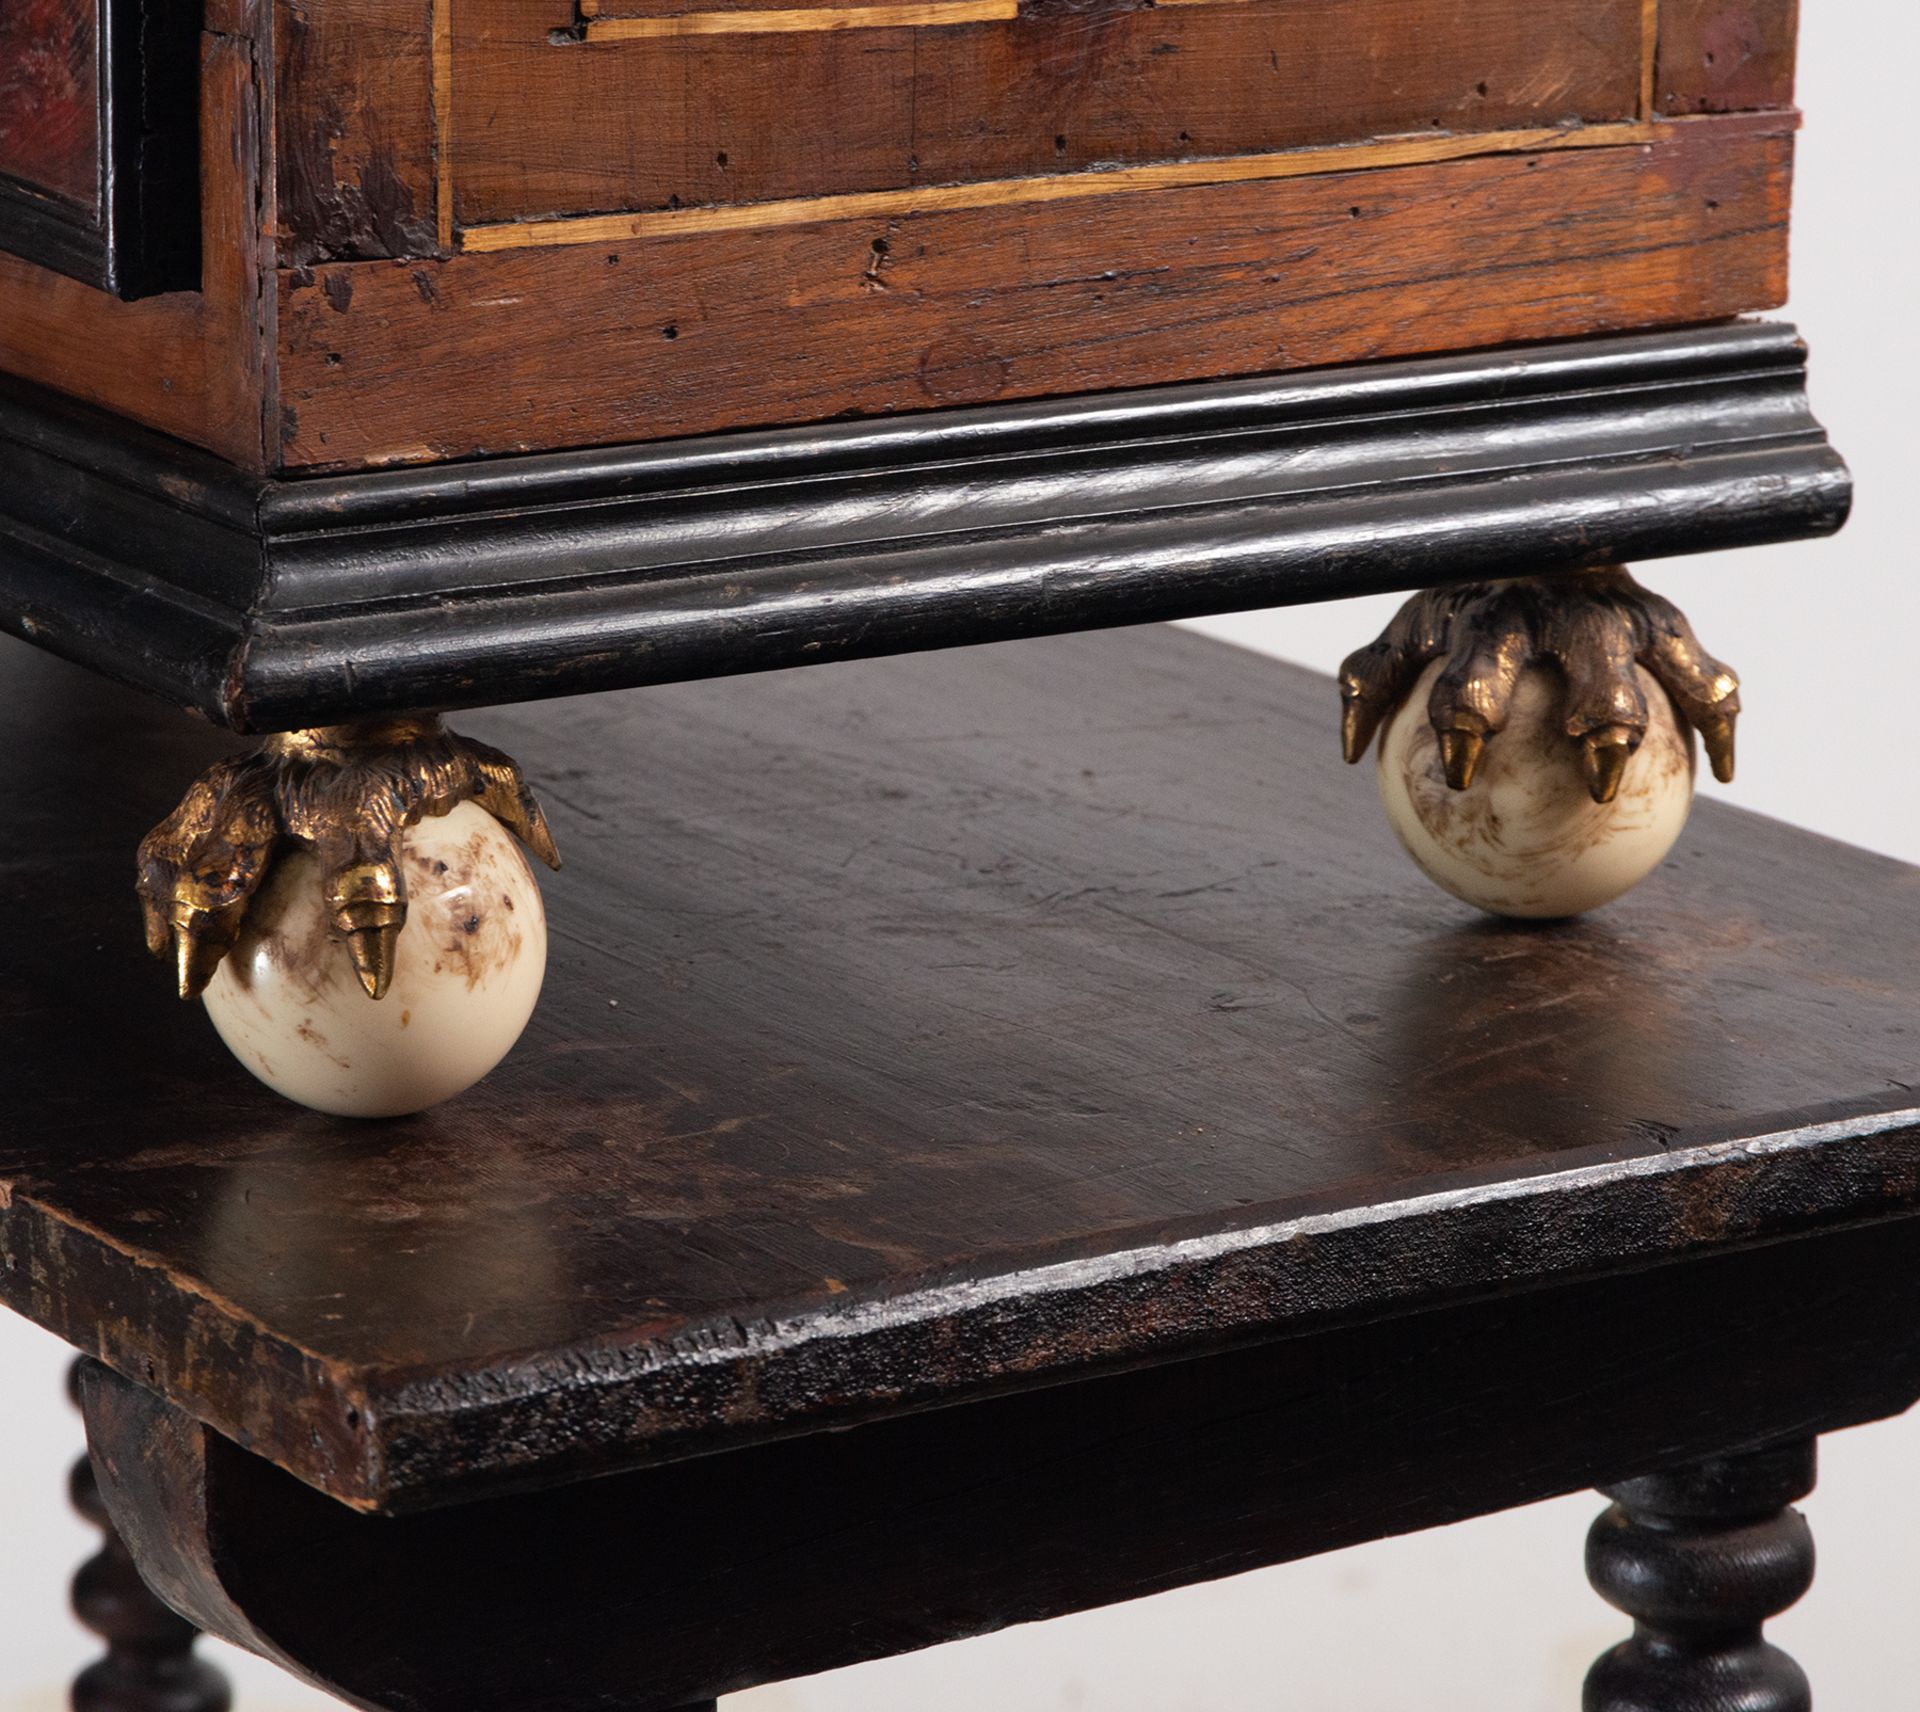 Hispano Flemish Cabinet in Tortoiseshell and bone, feet and sconces in bronze, 18th century - Image 5 of 8